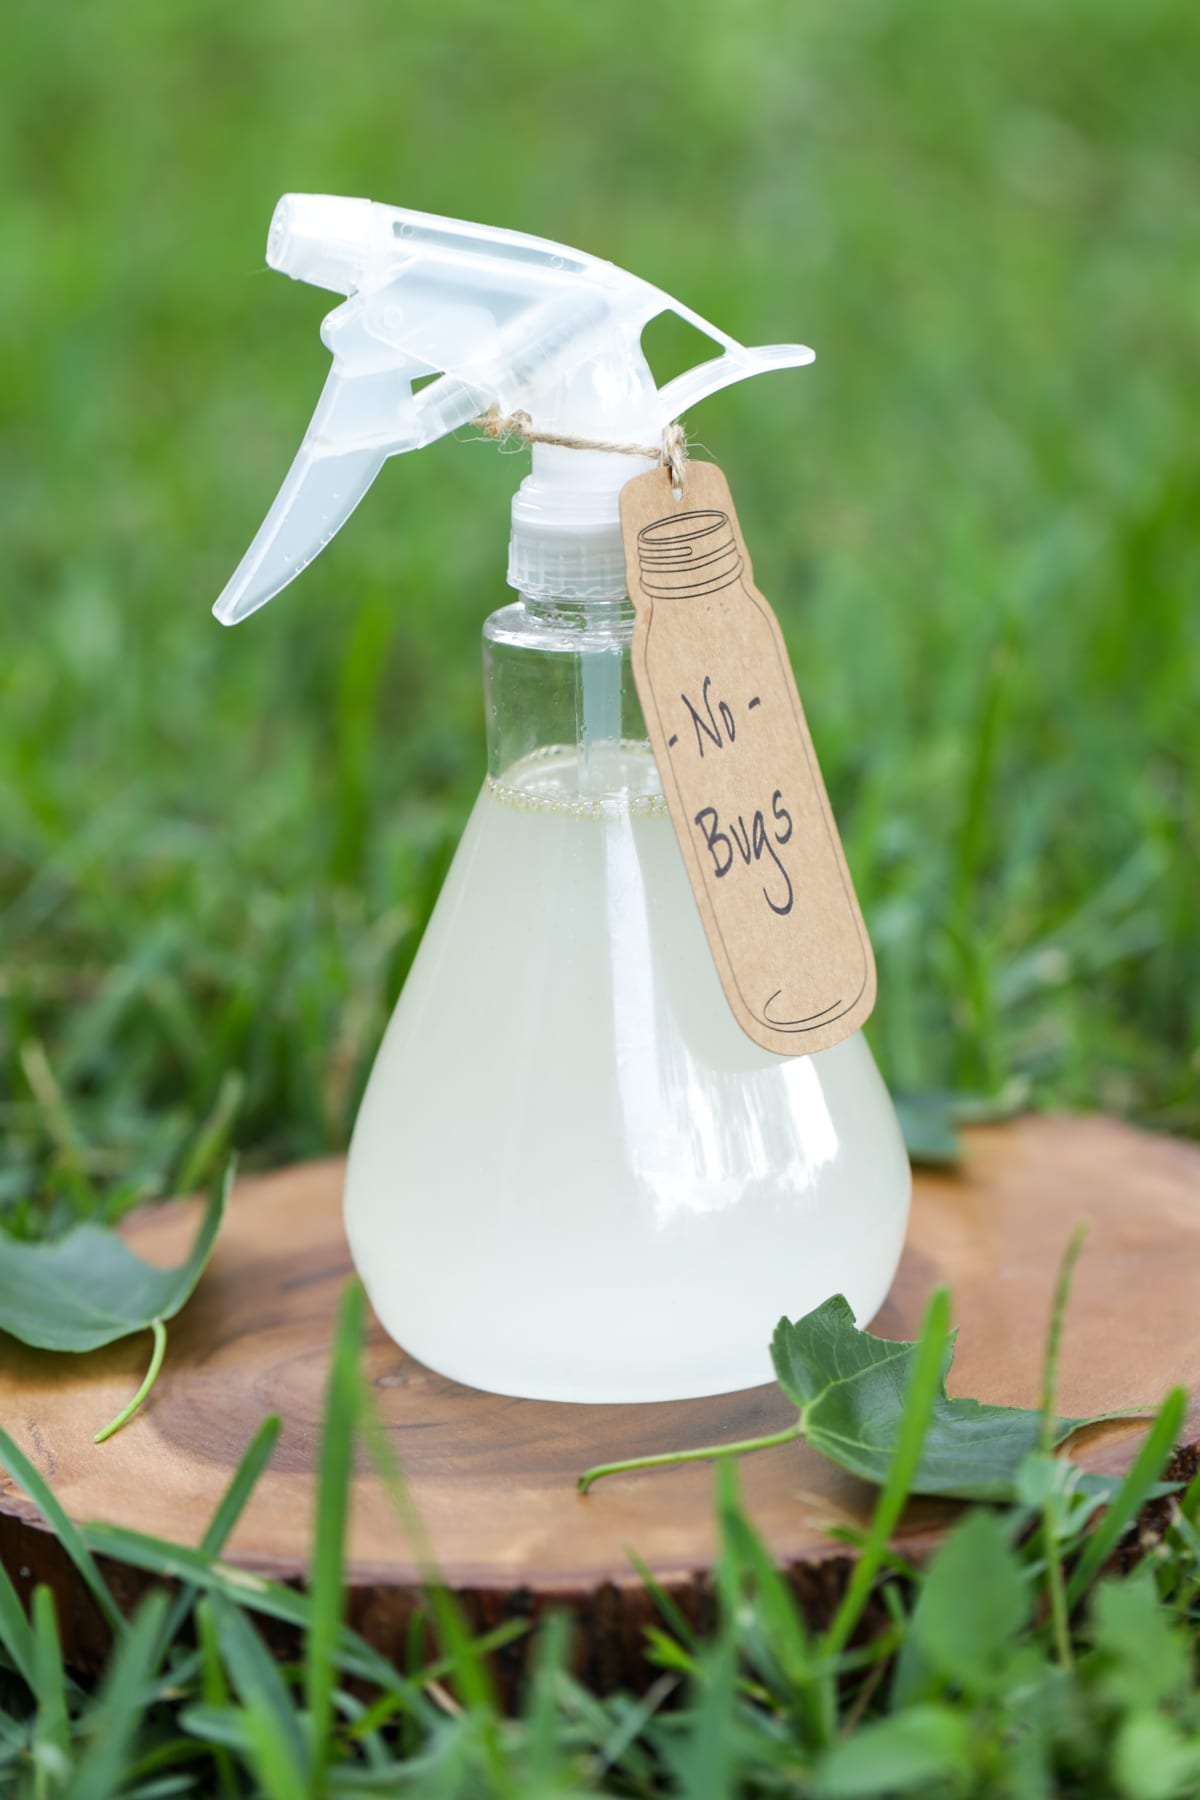 Clear glass bottle with a tag on it saying "no bugs" to label the solution.